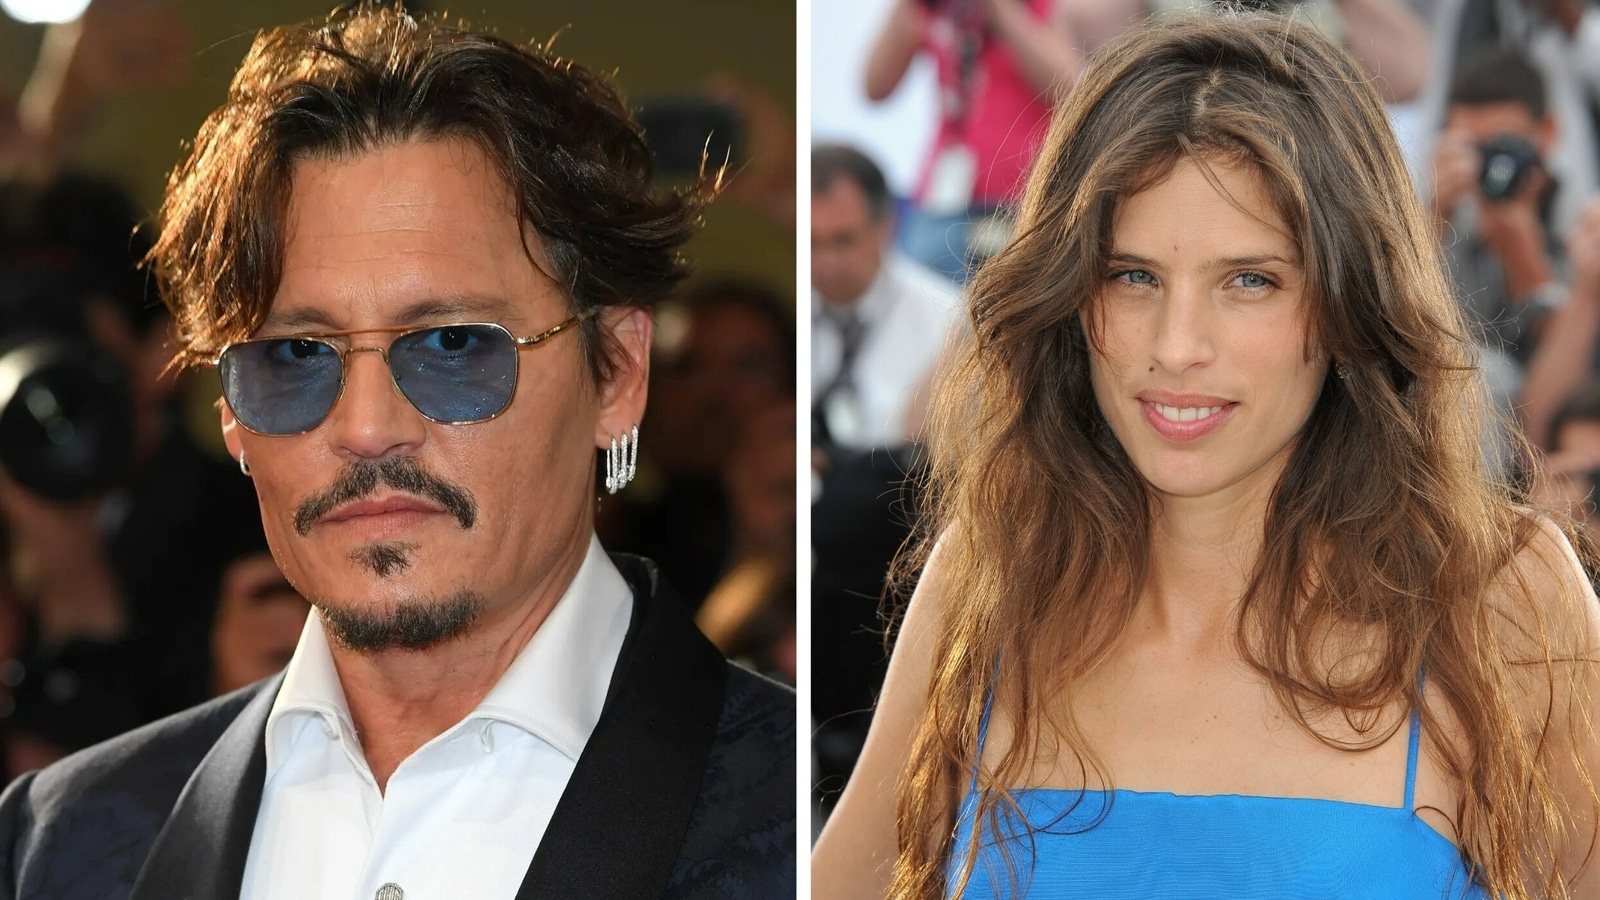 cannes film festival 2023: Cannes 2023 is back! Film festival kickstarts  with screening of Johnny Depp-starrer period drama 'Jeanne du Barry' - The  Economic Times